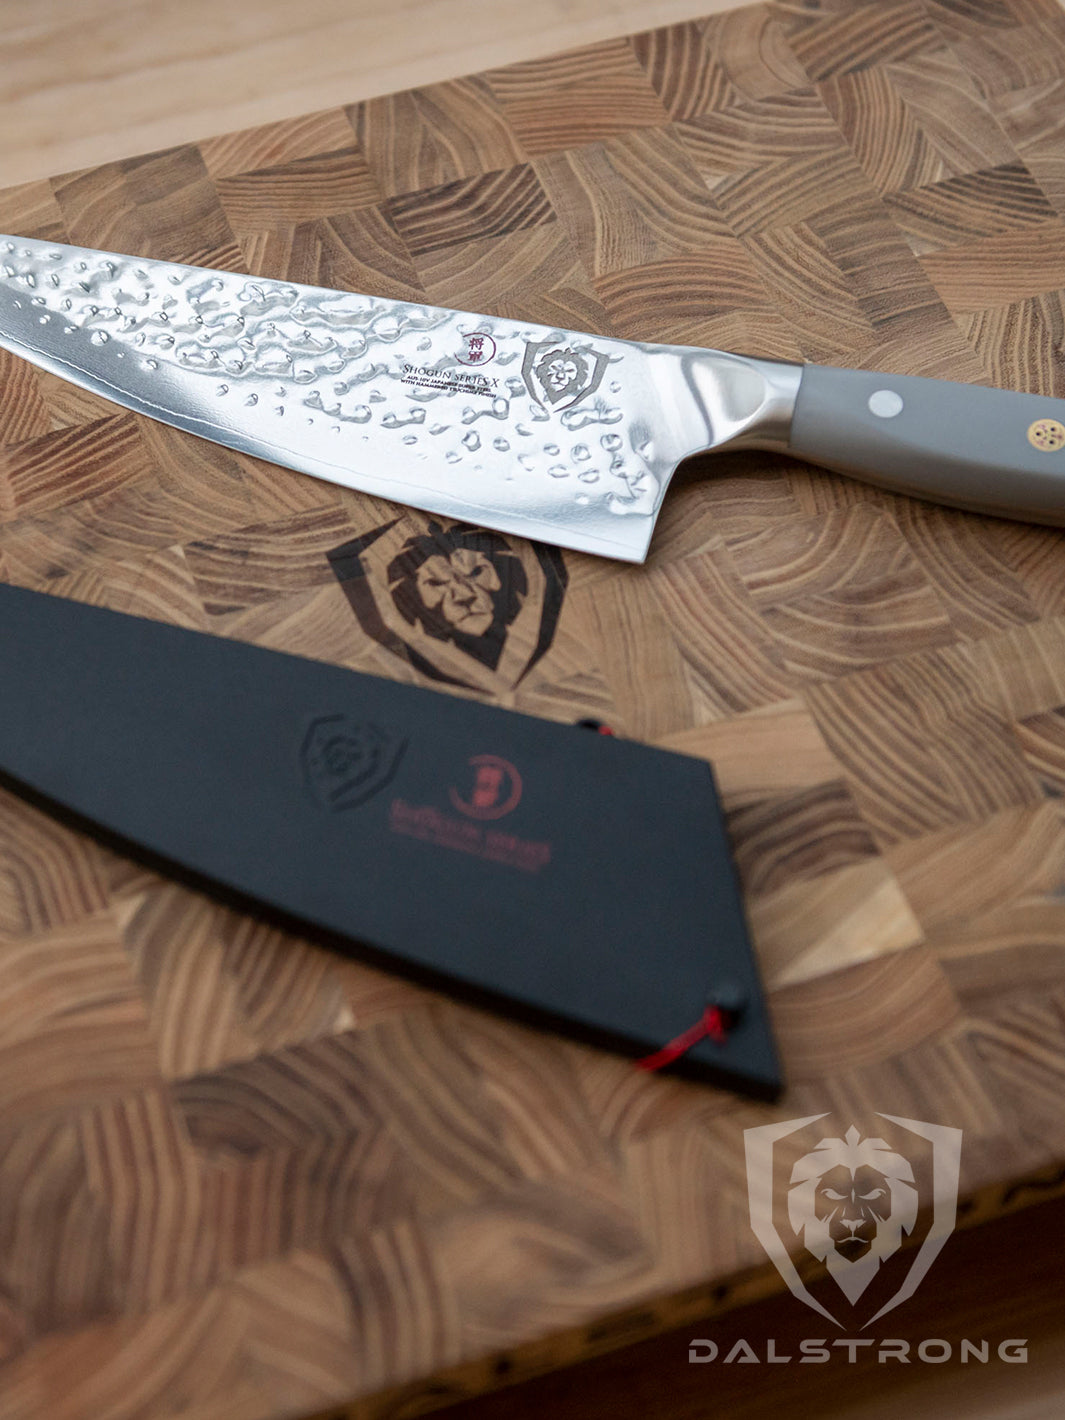 Dasltrong shogun series 8 inch chef knife with smokey gray handle and it's black sheath on top of a dalstrong wooden board.